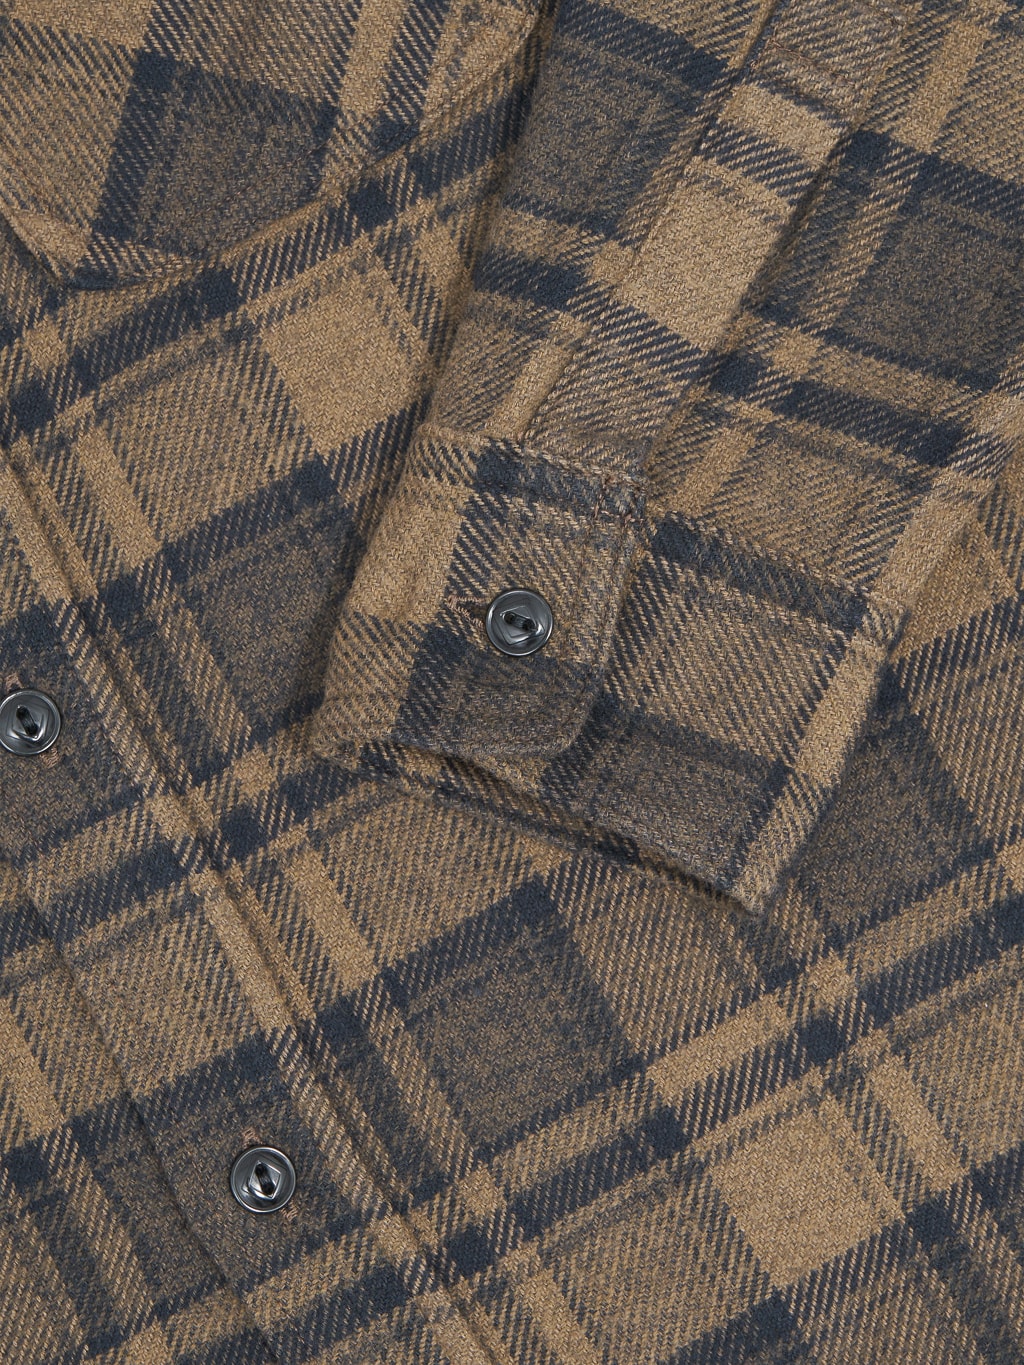 Fob Factory F3497 Nel Check Work flannel Shirt Brown  buttons